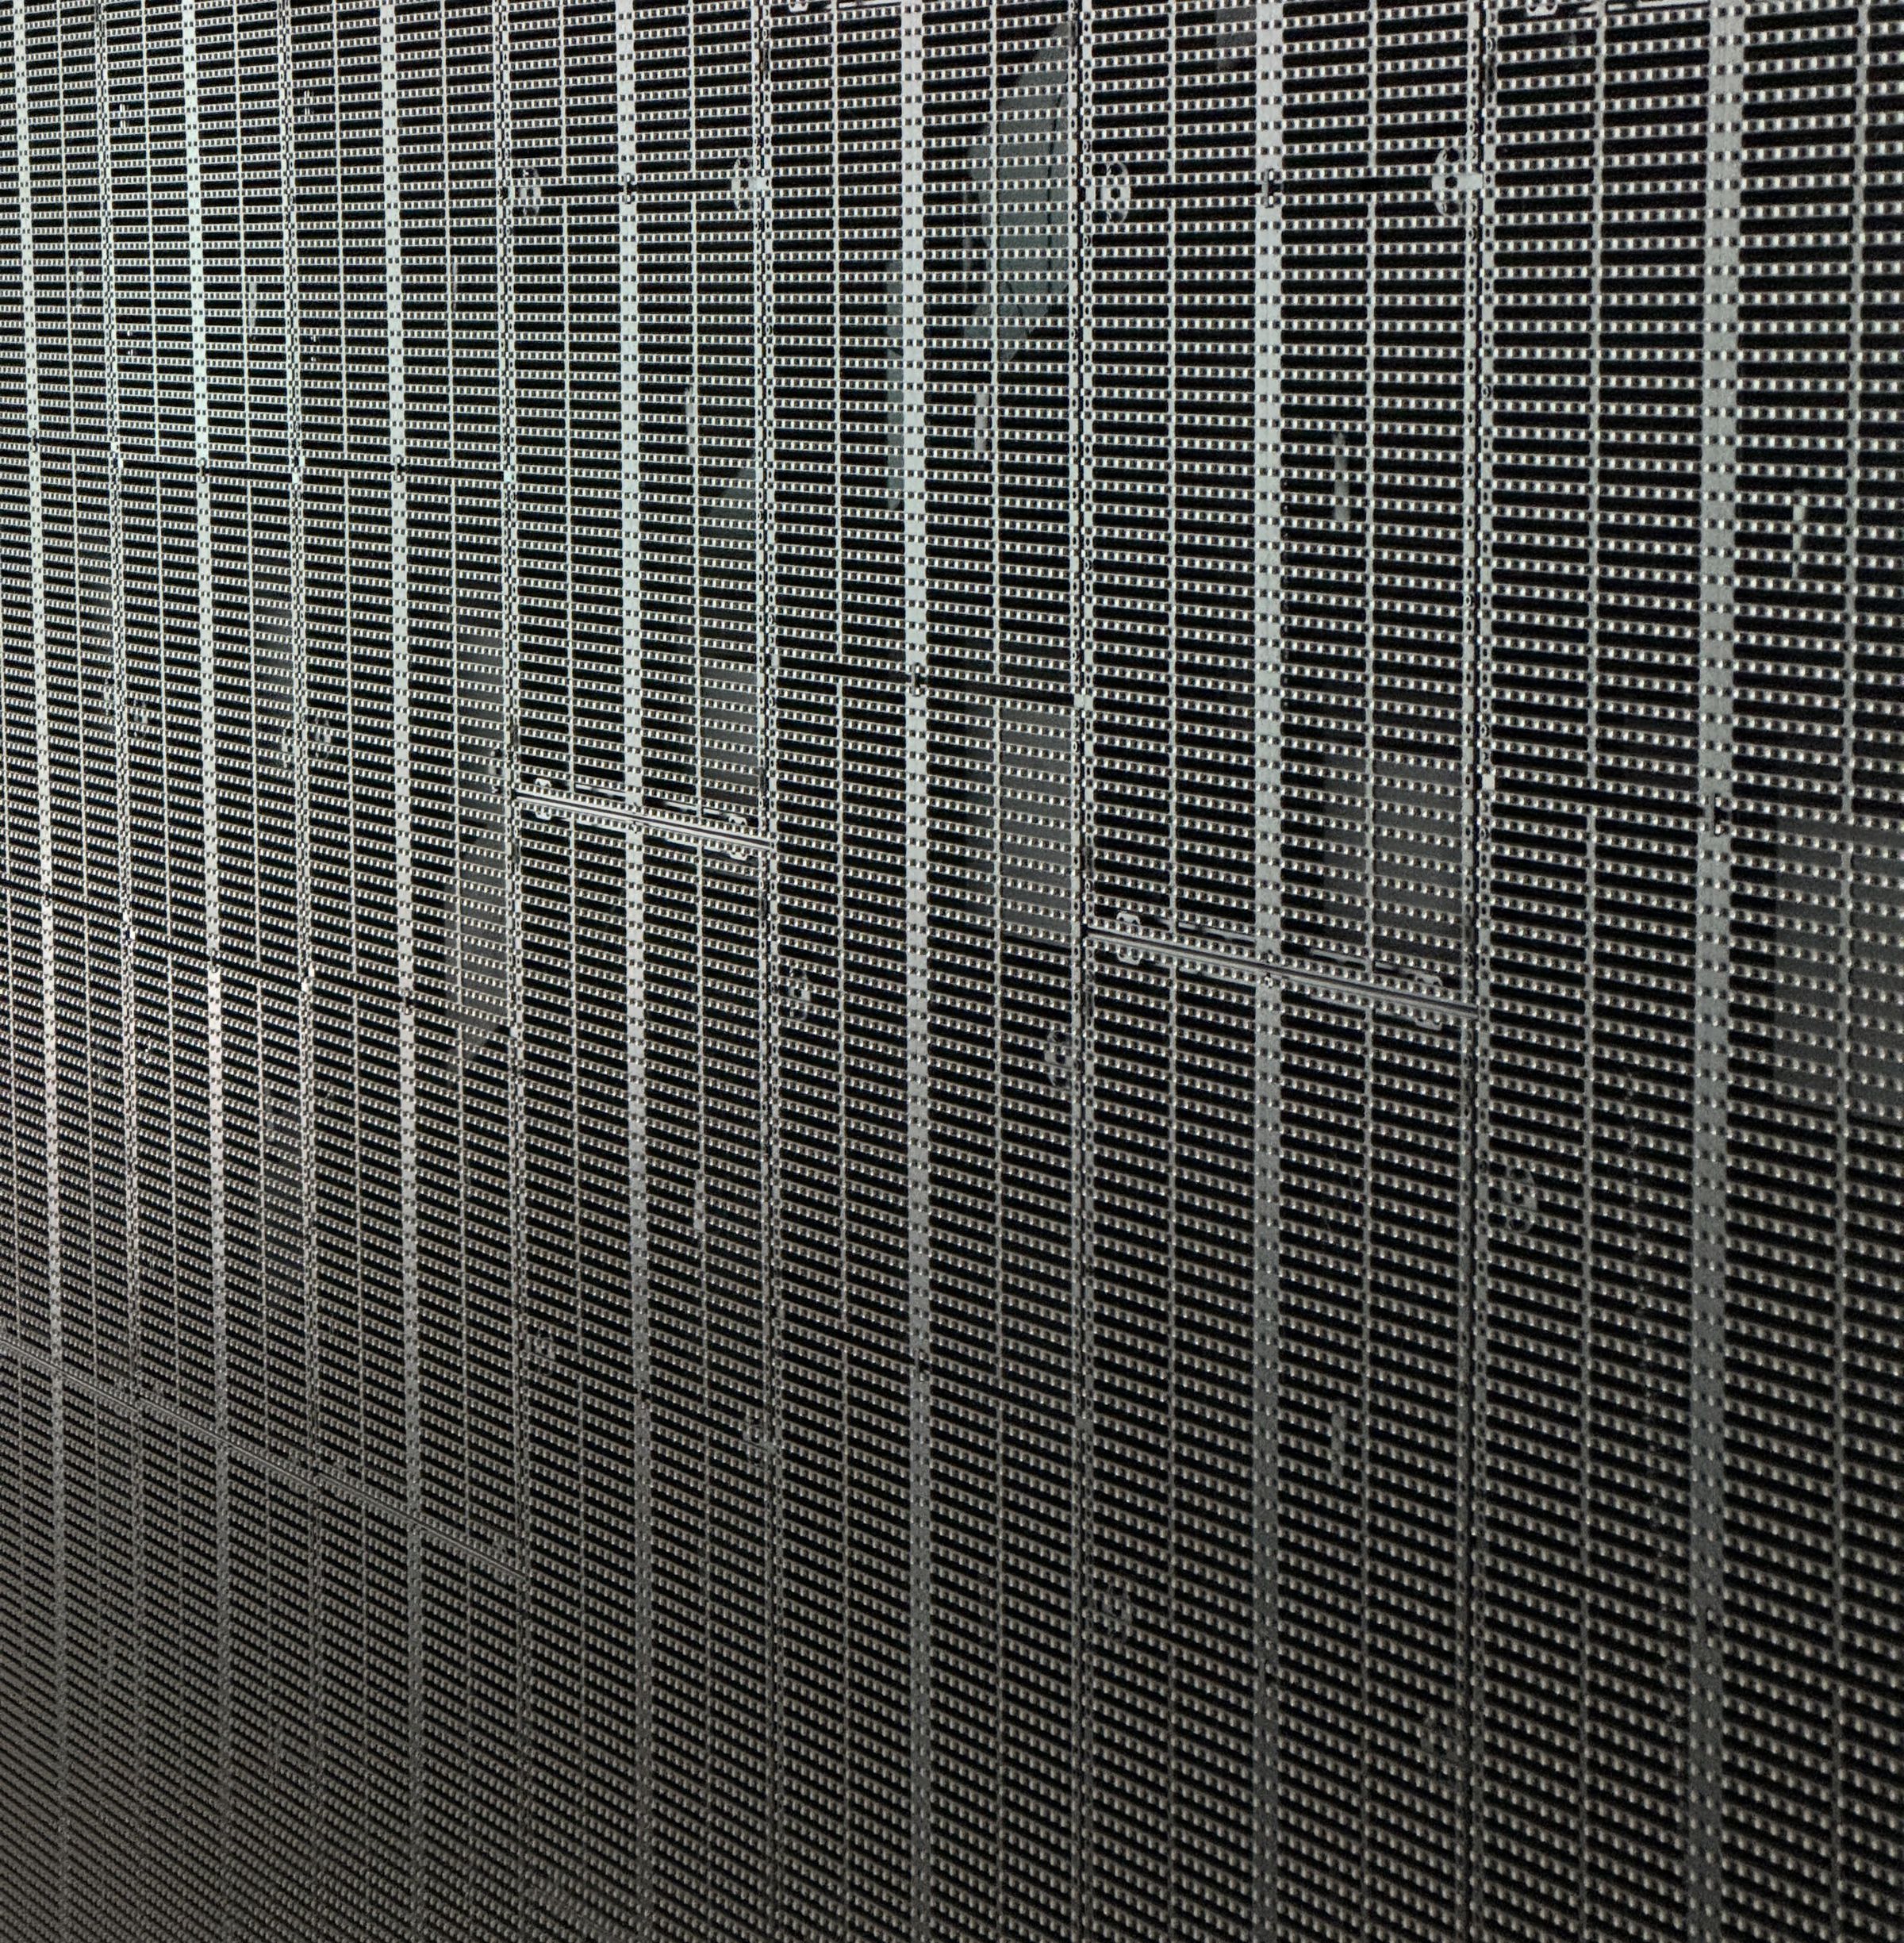 A close-up photo of the Sphere’s display, rows and columns of tiny lights on a see-through mesh.